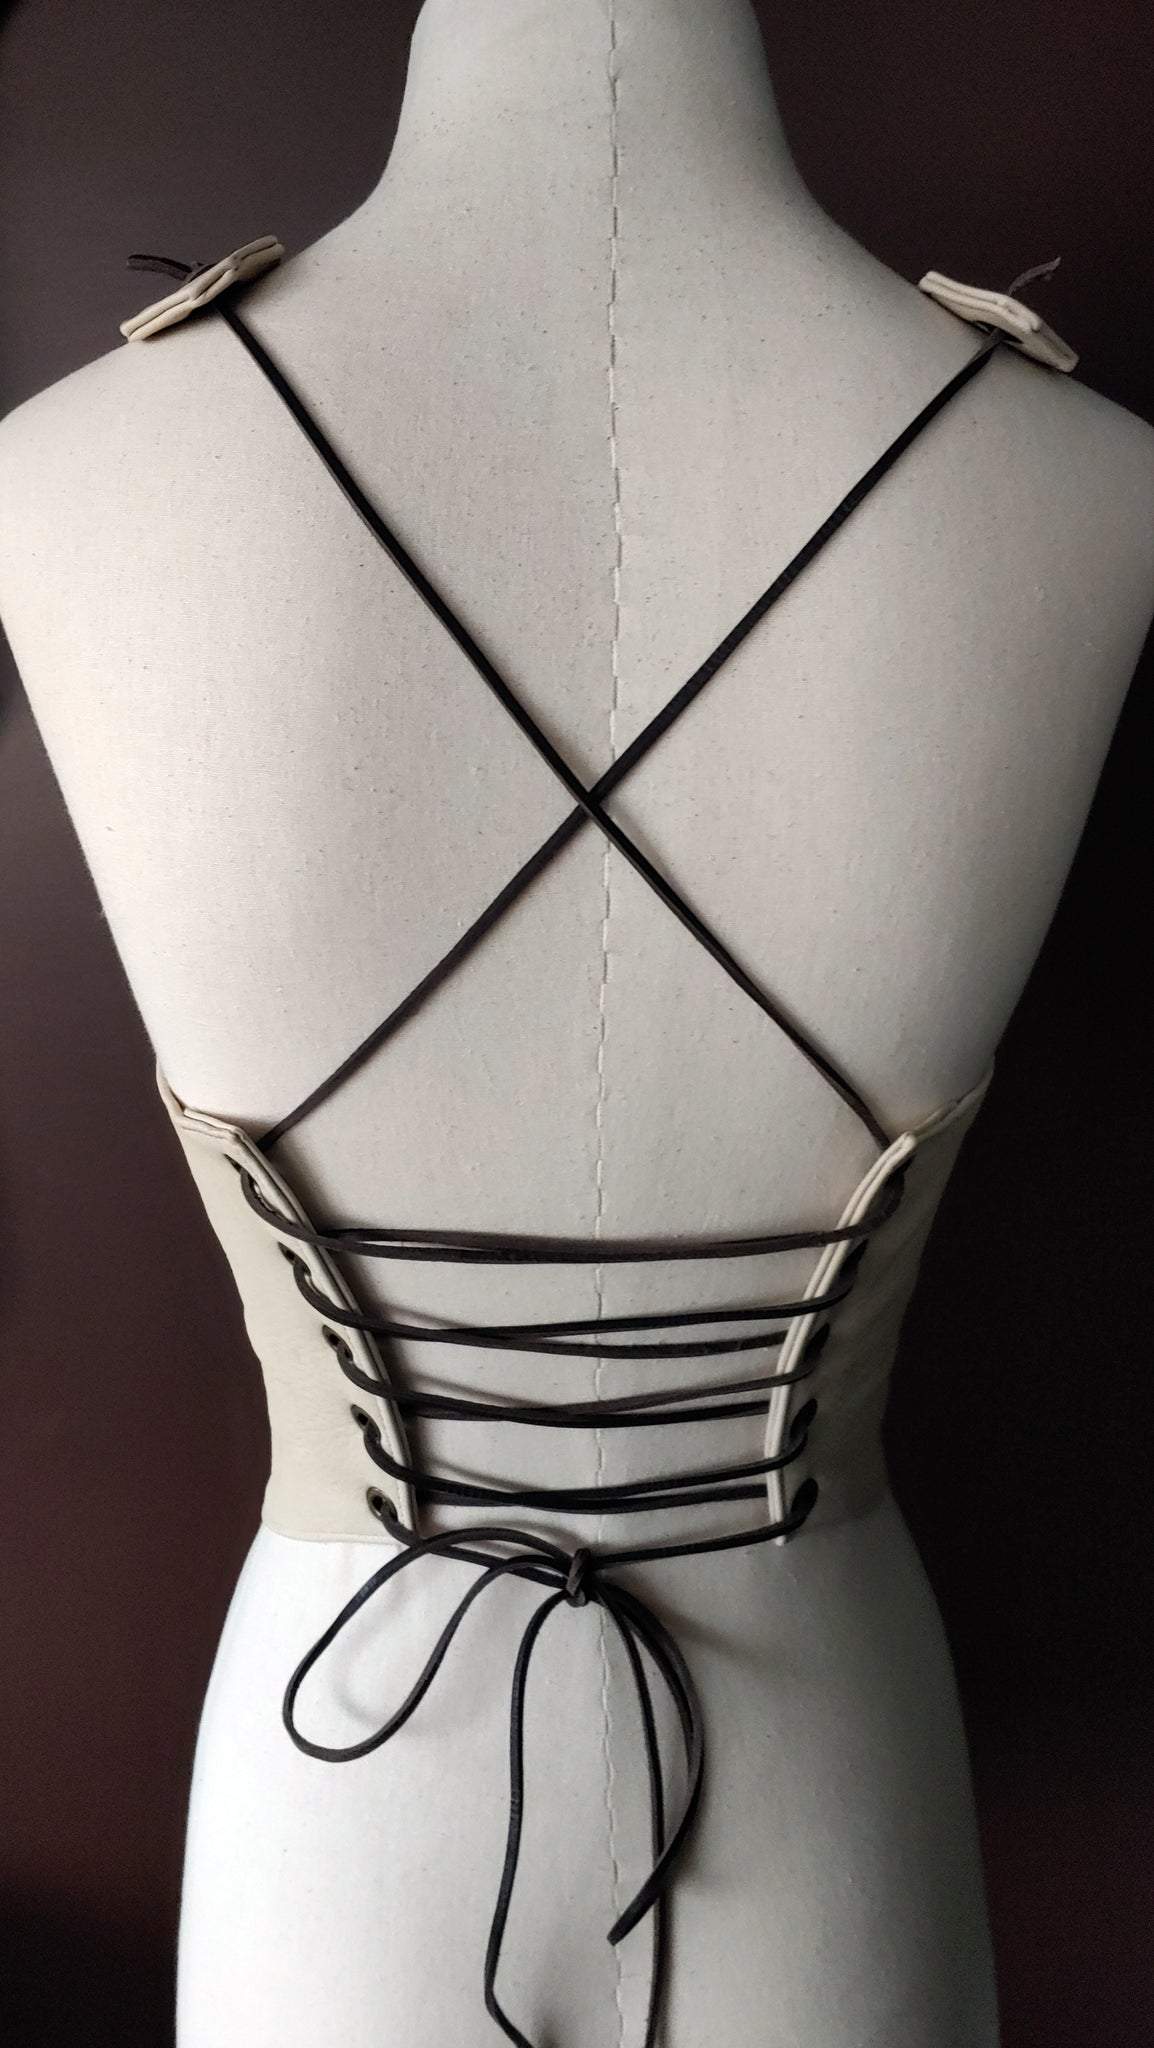 Rebel Leather Halter Top | Vest Style, Lace Up, Backless, PLONGE (Cow) Leather Top  - SS1134-PL